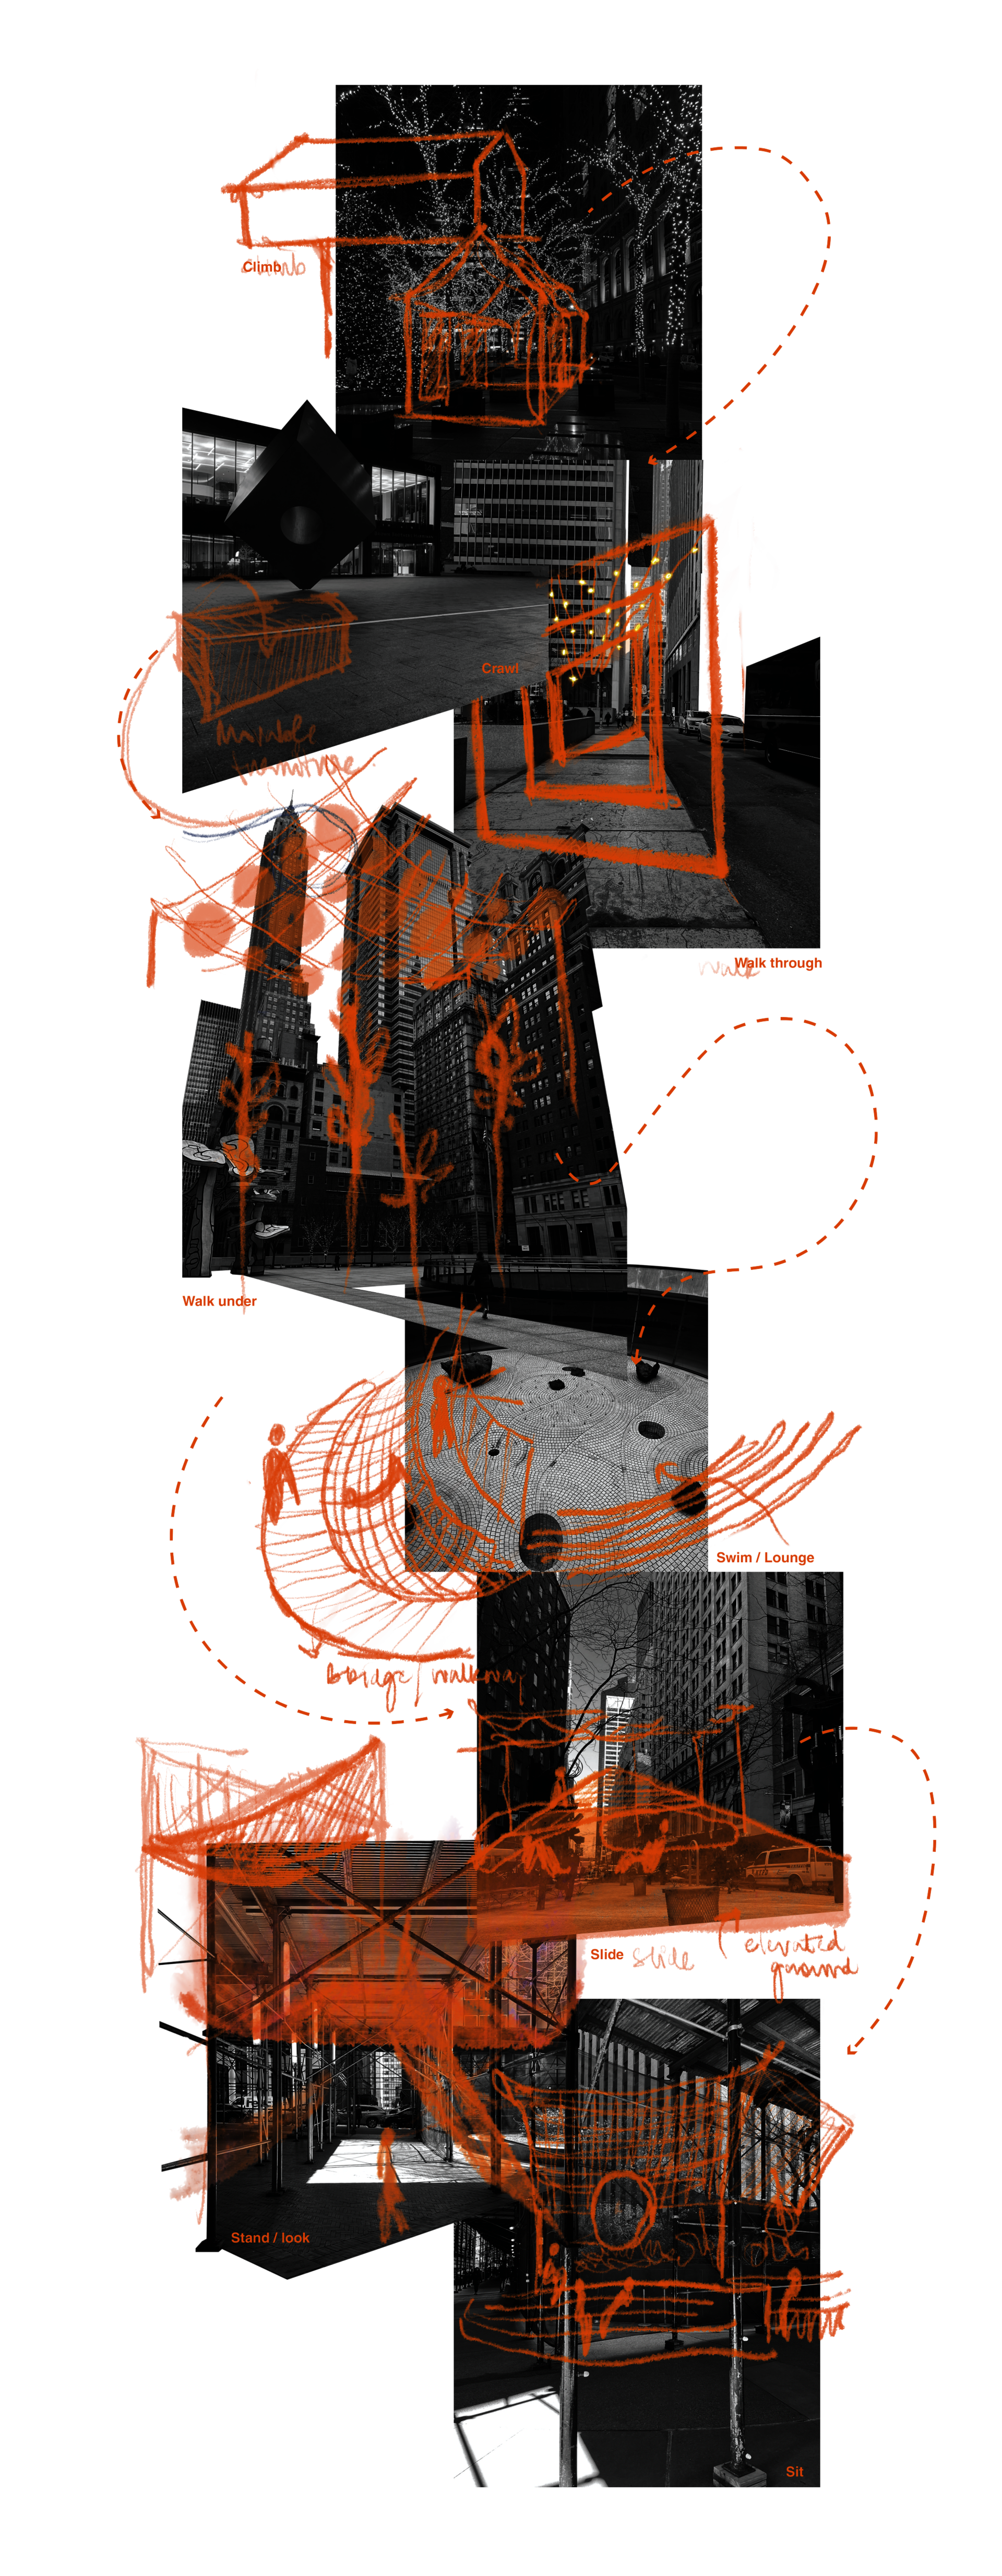 A collage stringing together images of the four chosen sites in New York City with an overlay of conceptual sketches of probable interventions, creating a network of play throughout the site cluster